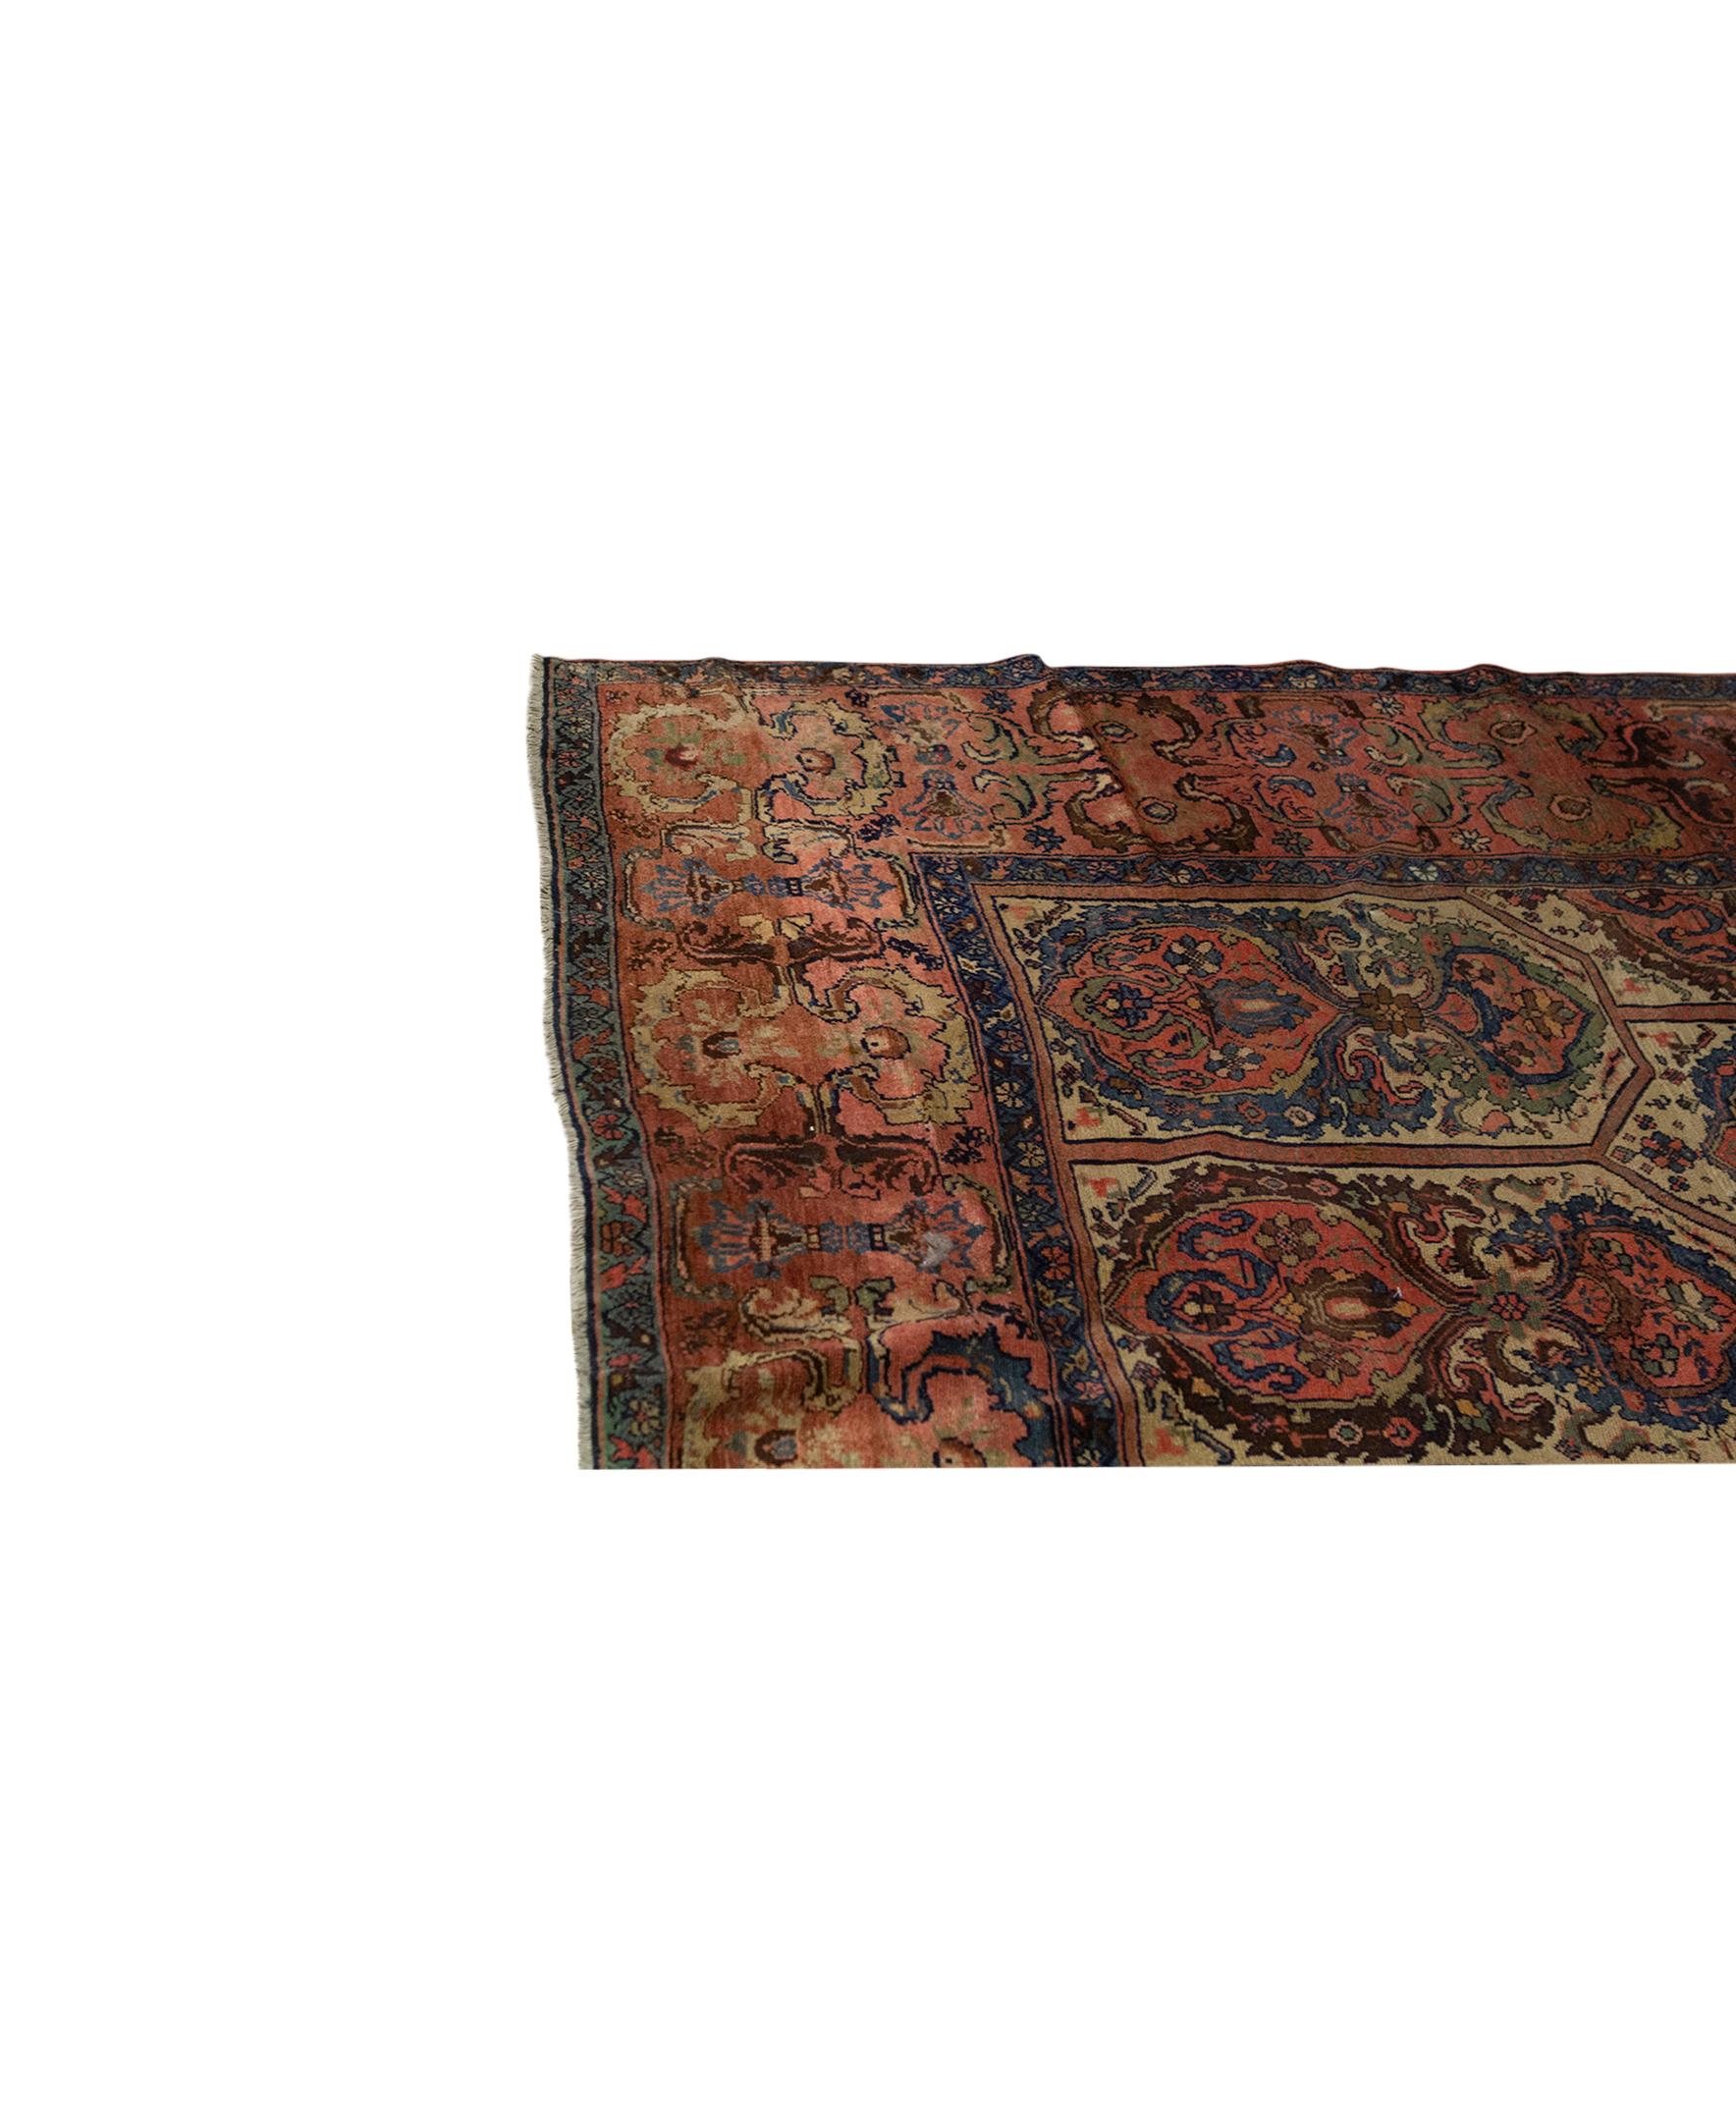   Antique Persian Fine Traditional Handwoven Luxury Wool Multi Rug. Size: 10'-10